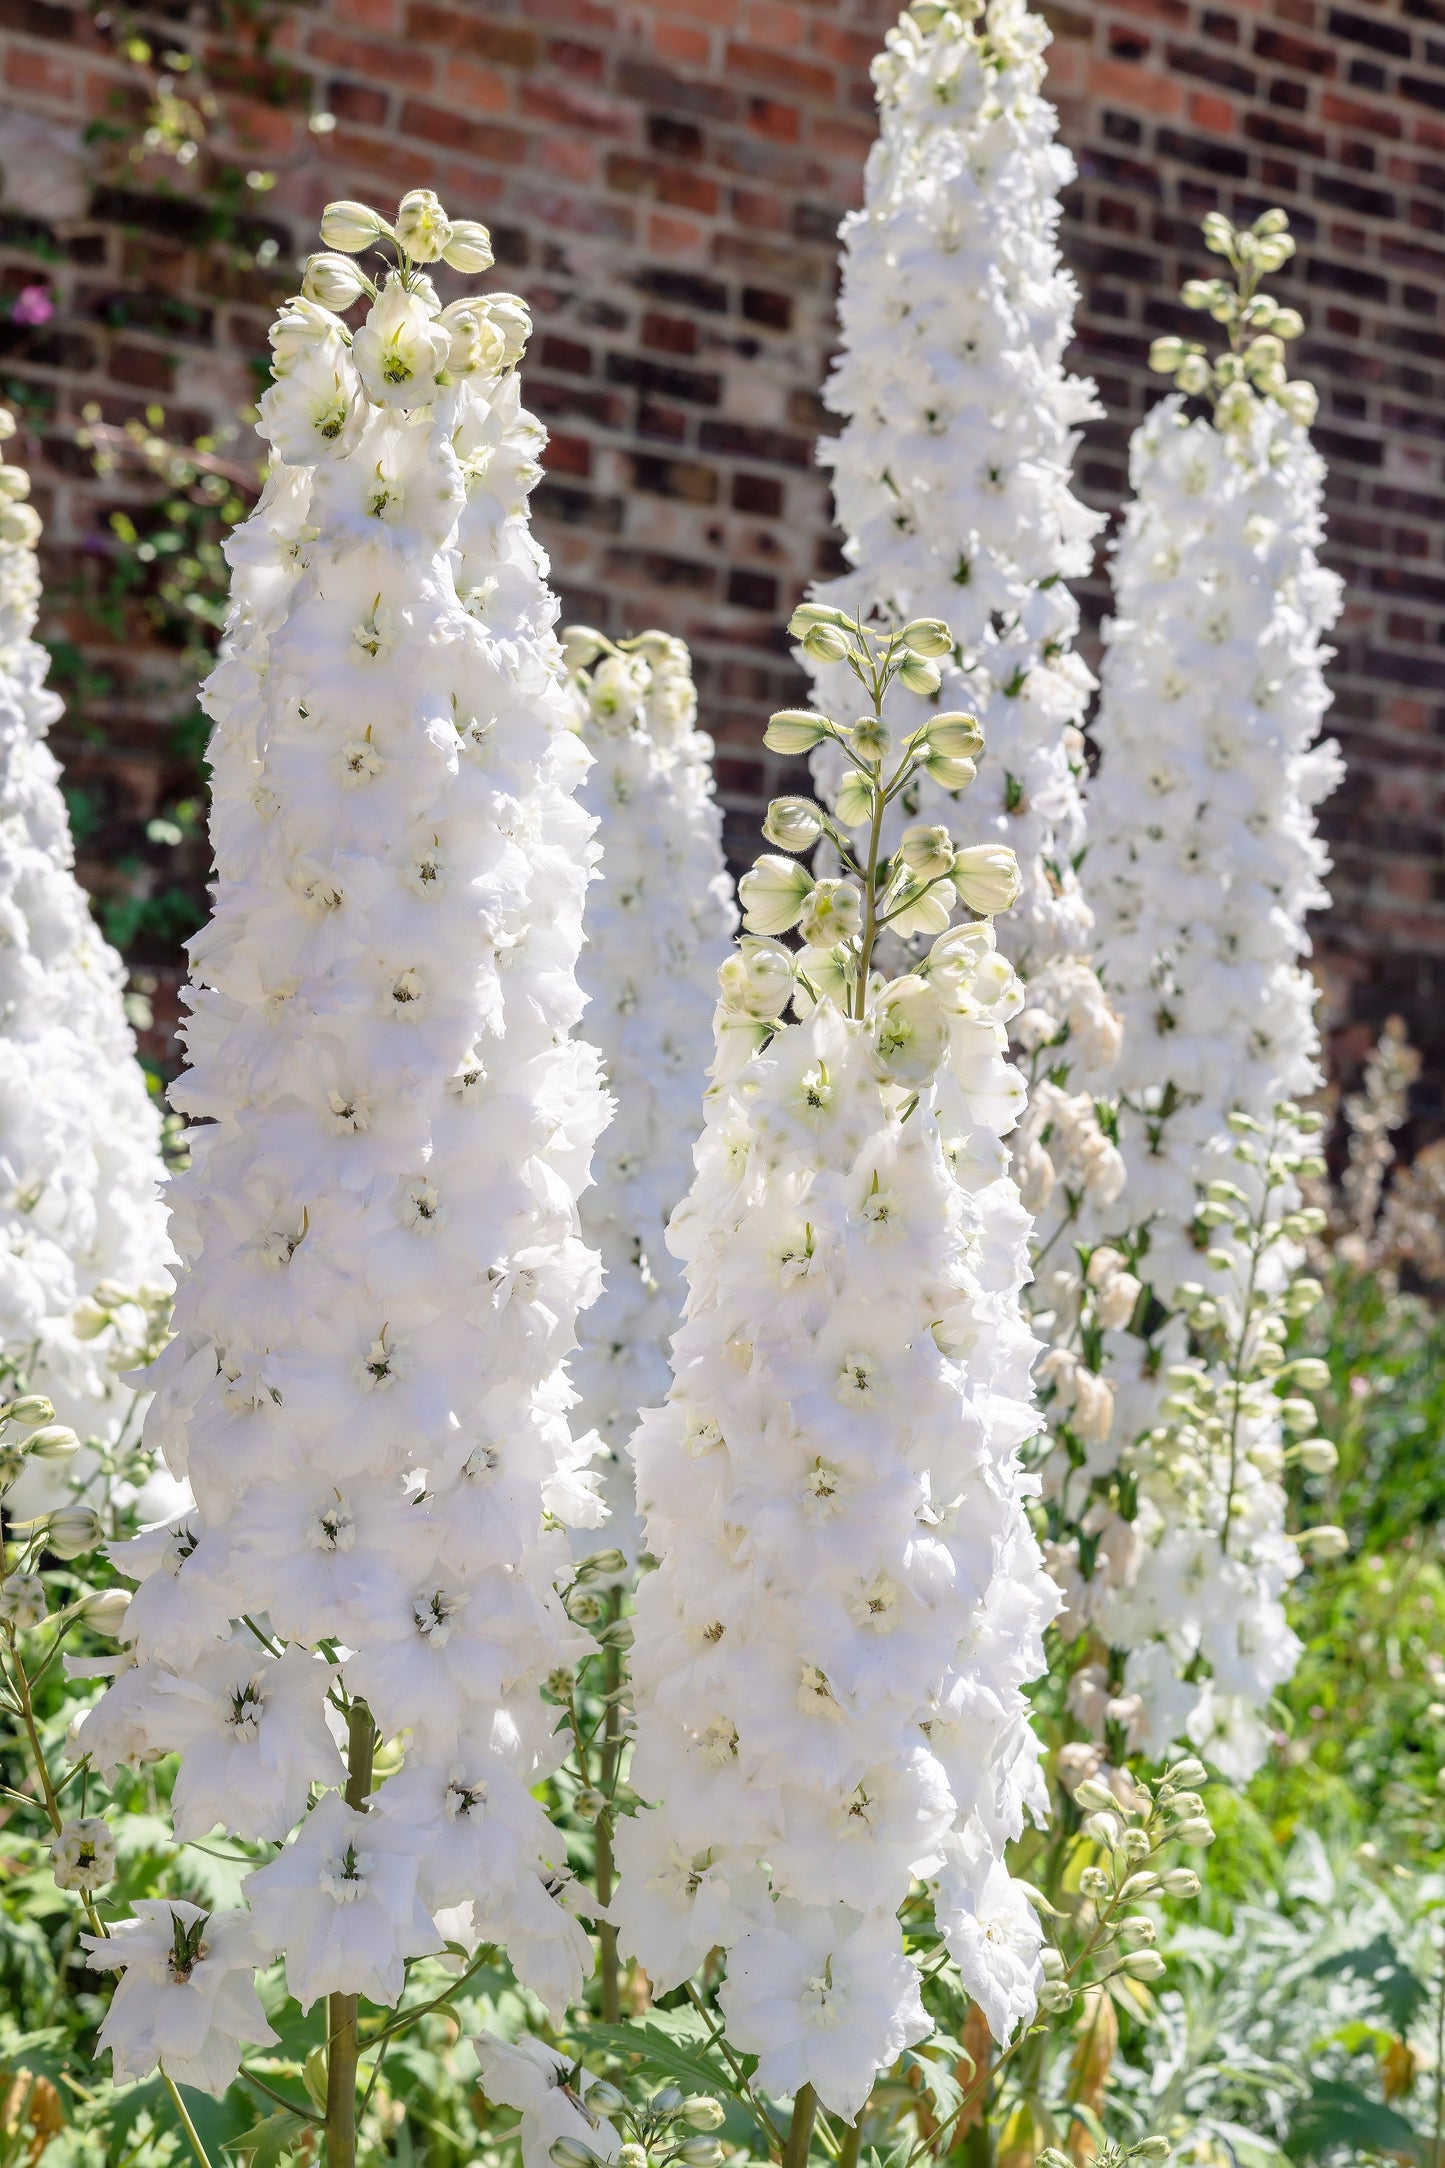 150 WHITE KING LARKSPUR Delphinium Consolida Giant Imperial Flower Seeds